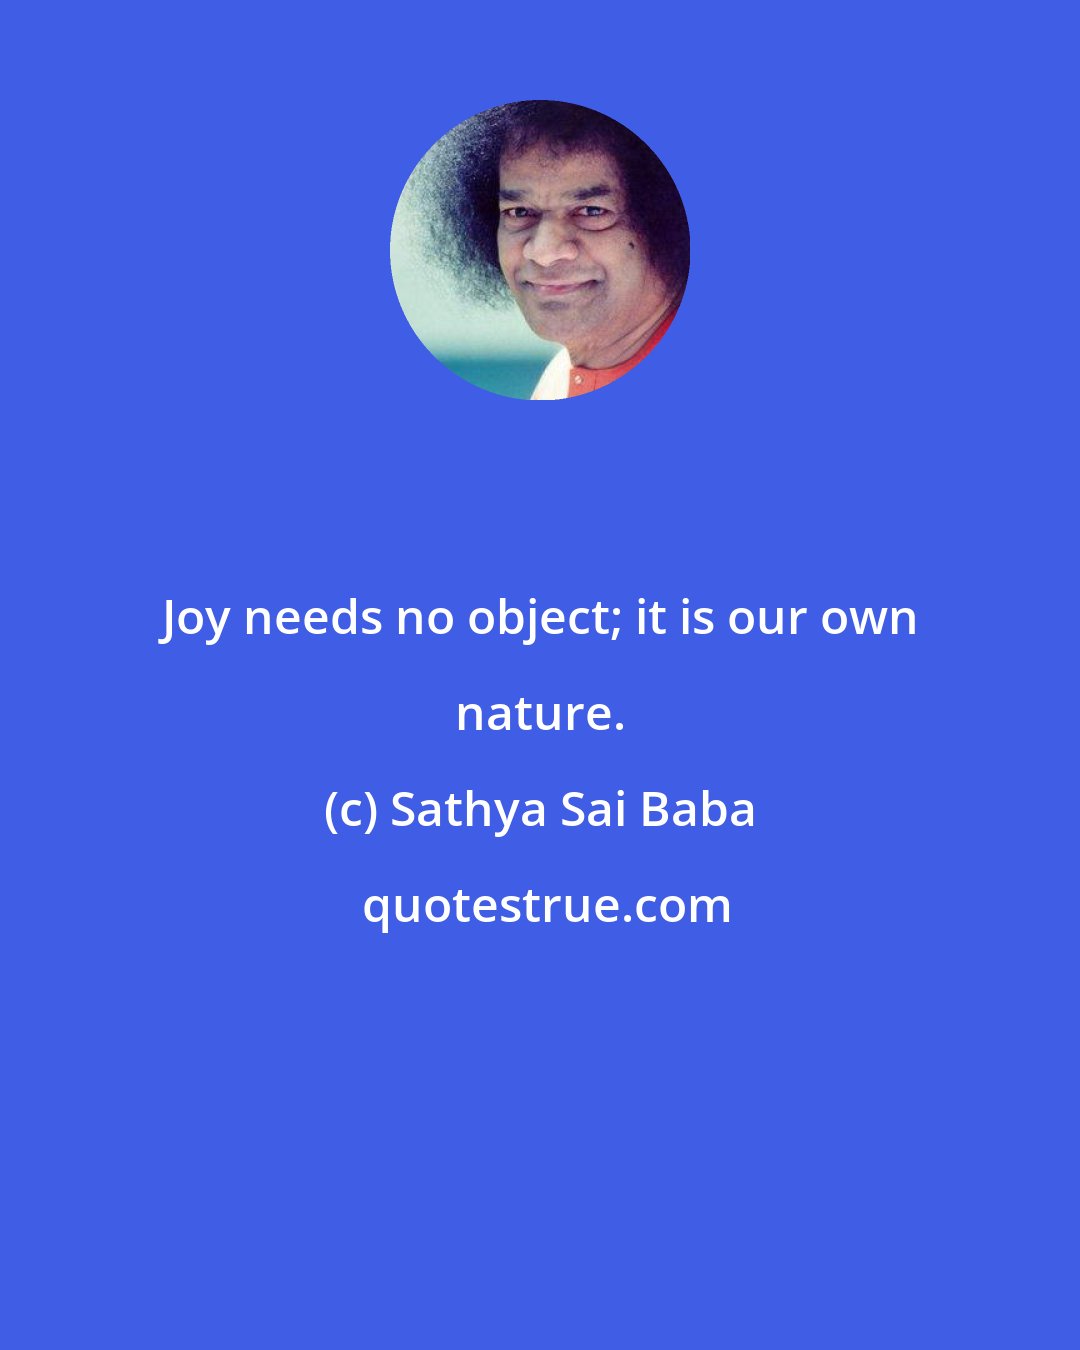 Sathya Sai Baba: Joy needs no object; it is our own nature.